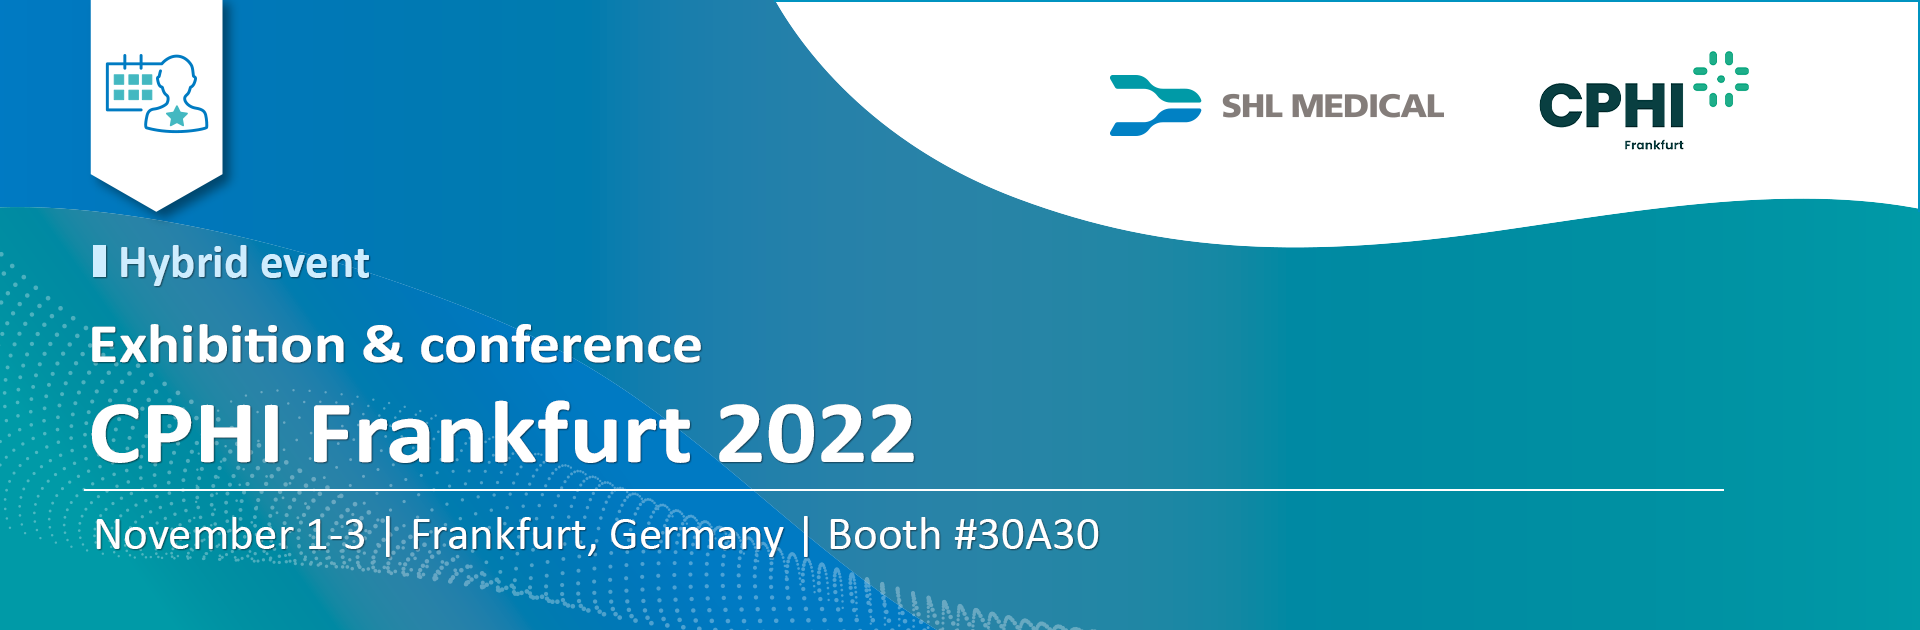 Banner of event participation announcement by SHL Medical titled “SHL Medical participates in the CPHI Frankfurt 2022”